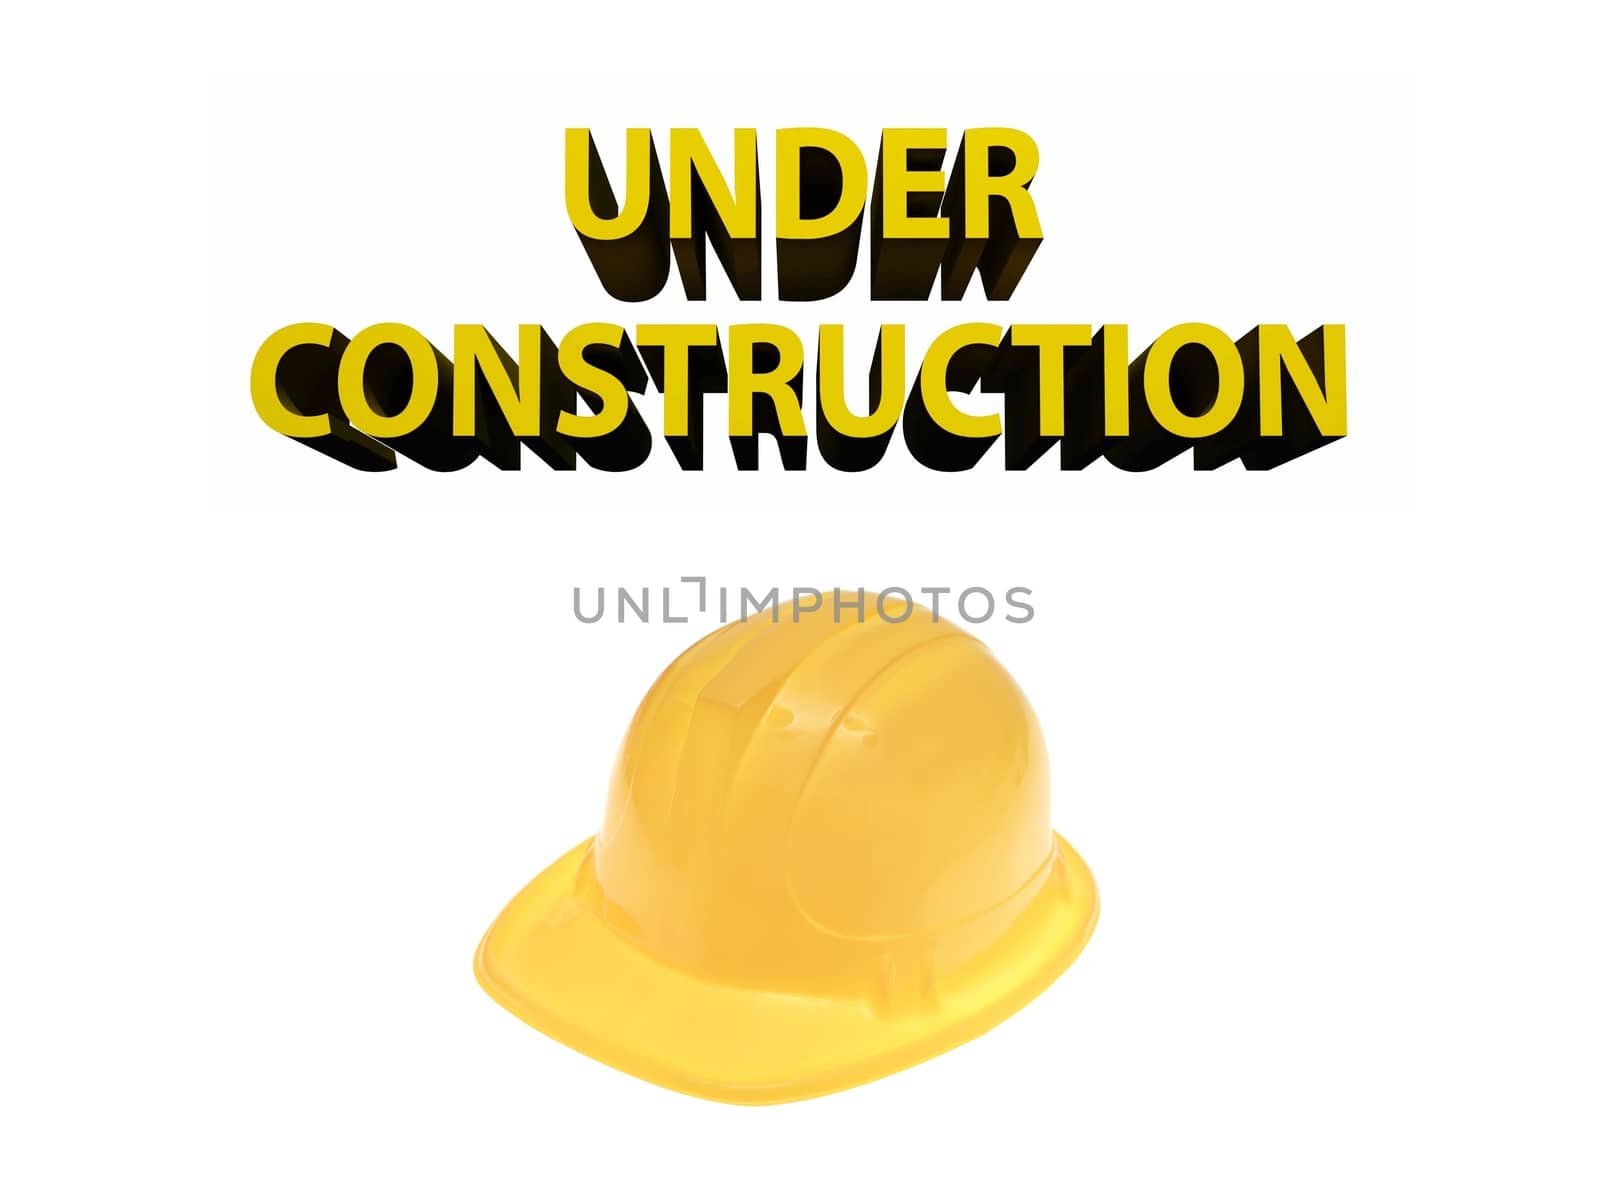 A conceptual maintanence and under construction image